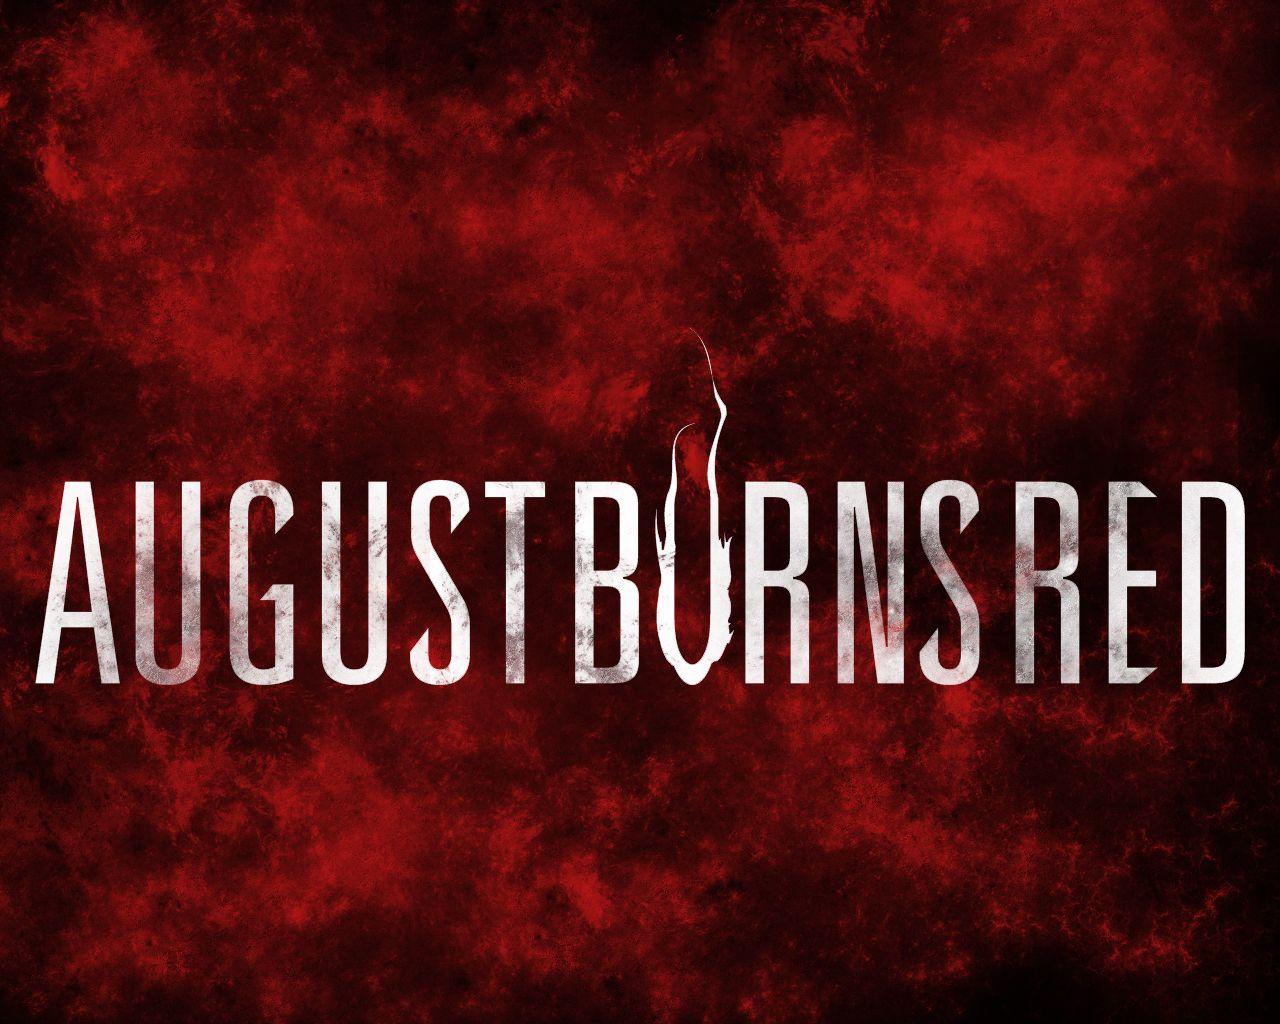 August Burns Red Wallpapers Wallpaper Cave Images, Photos, Reviews